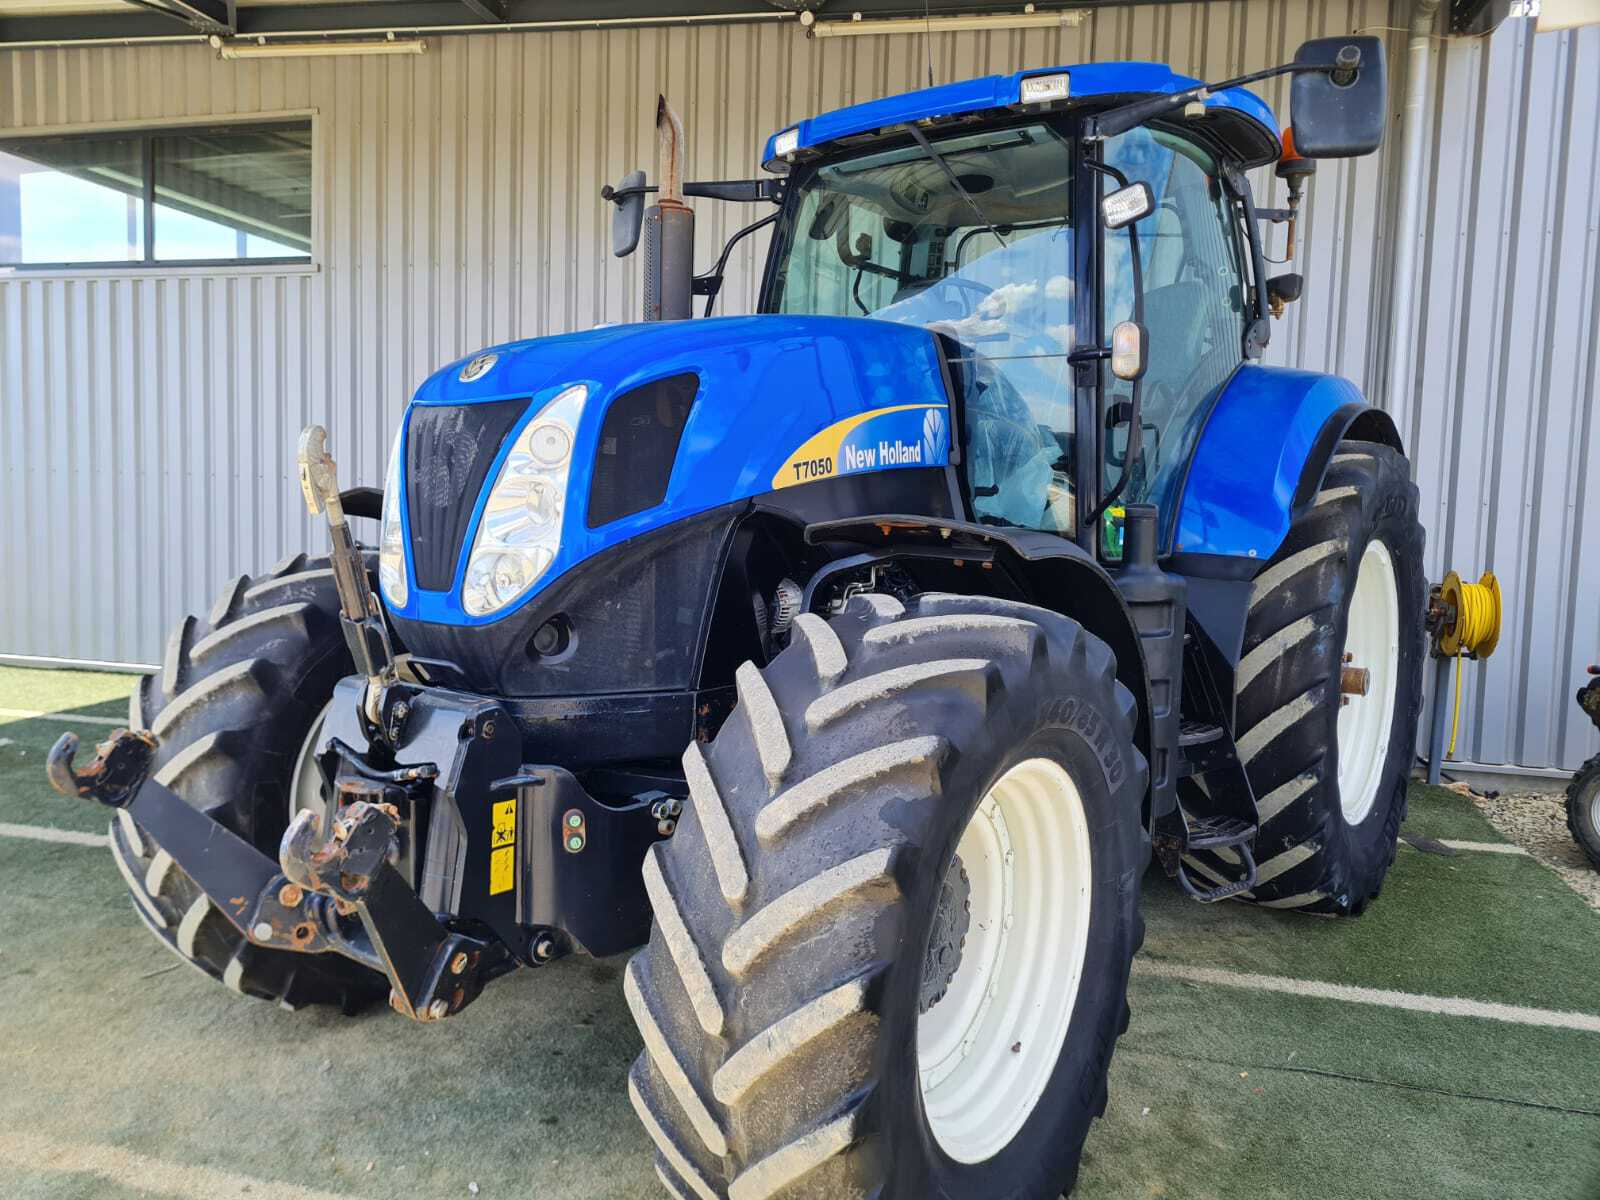 NEW HOLLAND T7050 PC